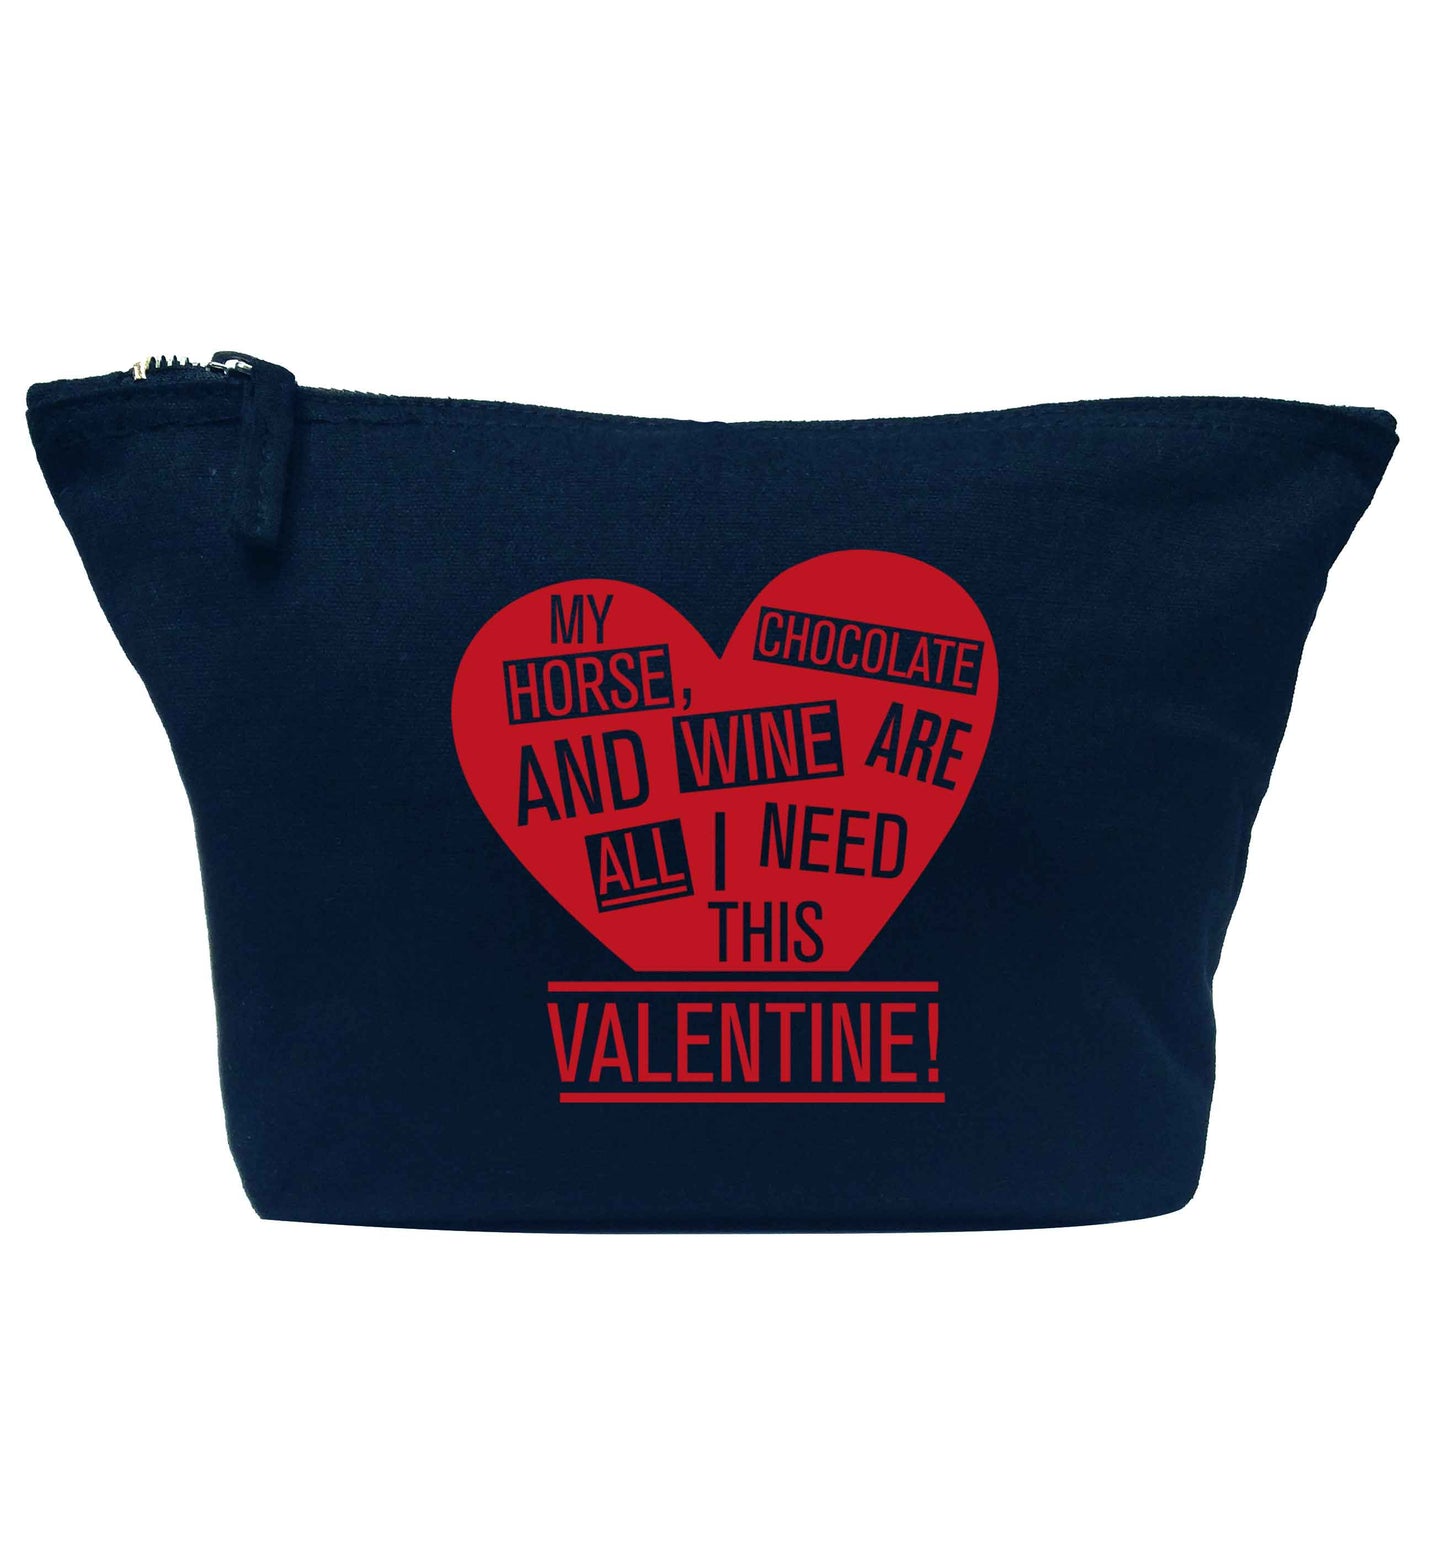 My horse chocolate and wine are all I need this valentine navy makeup bag